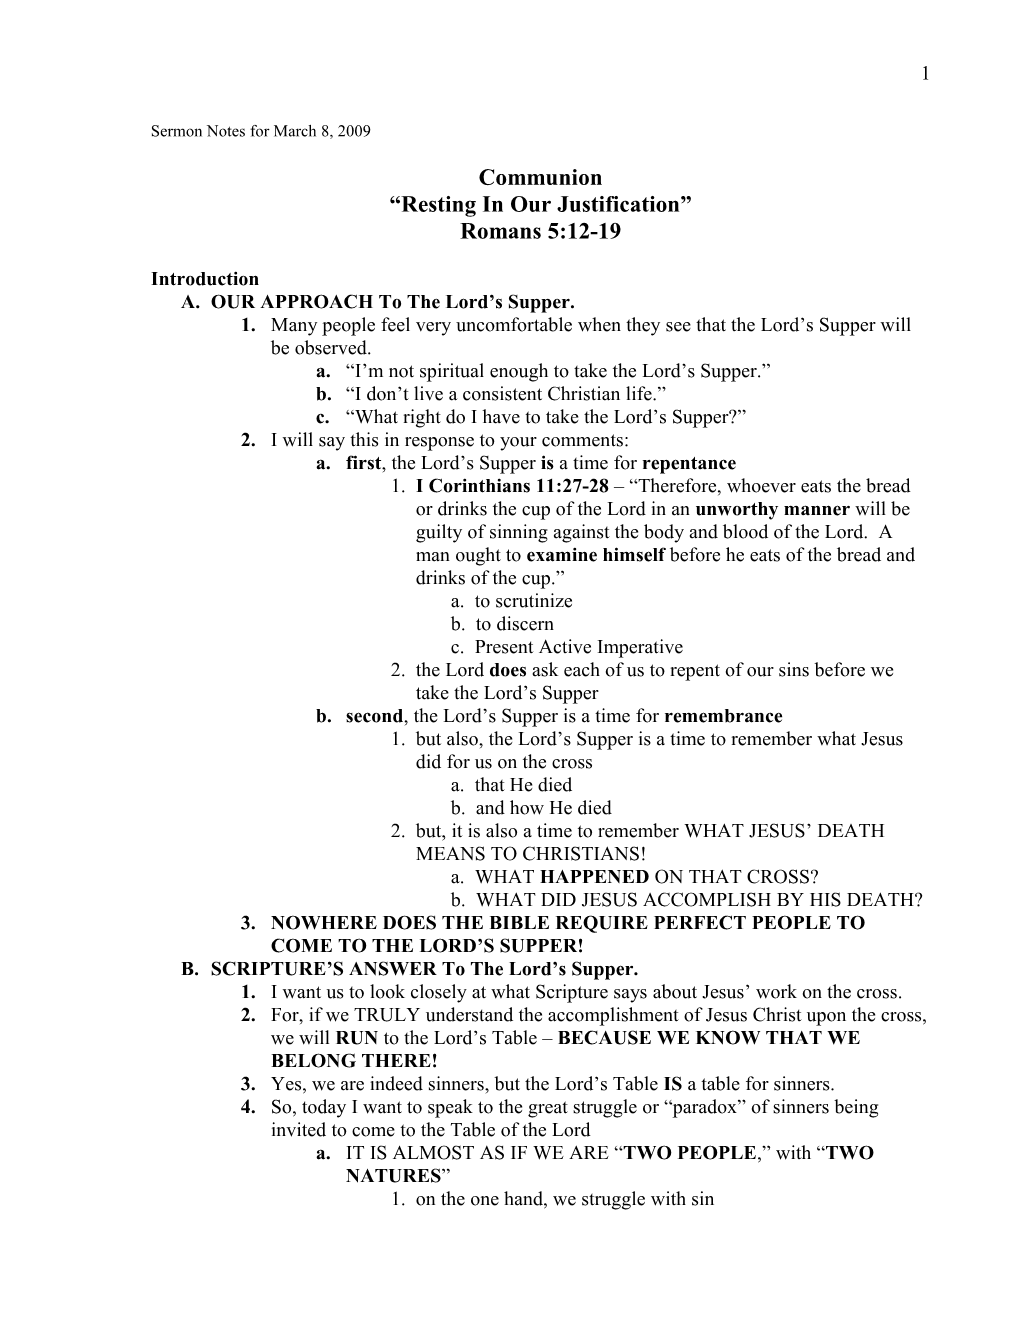 Sermon Notes for March 8, 2009